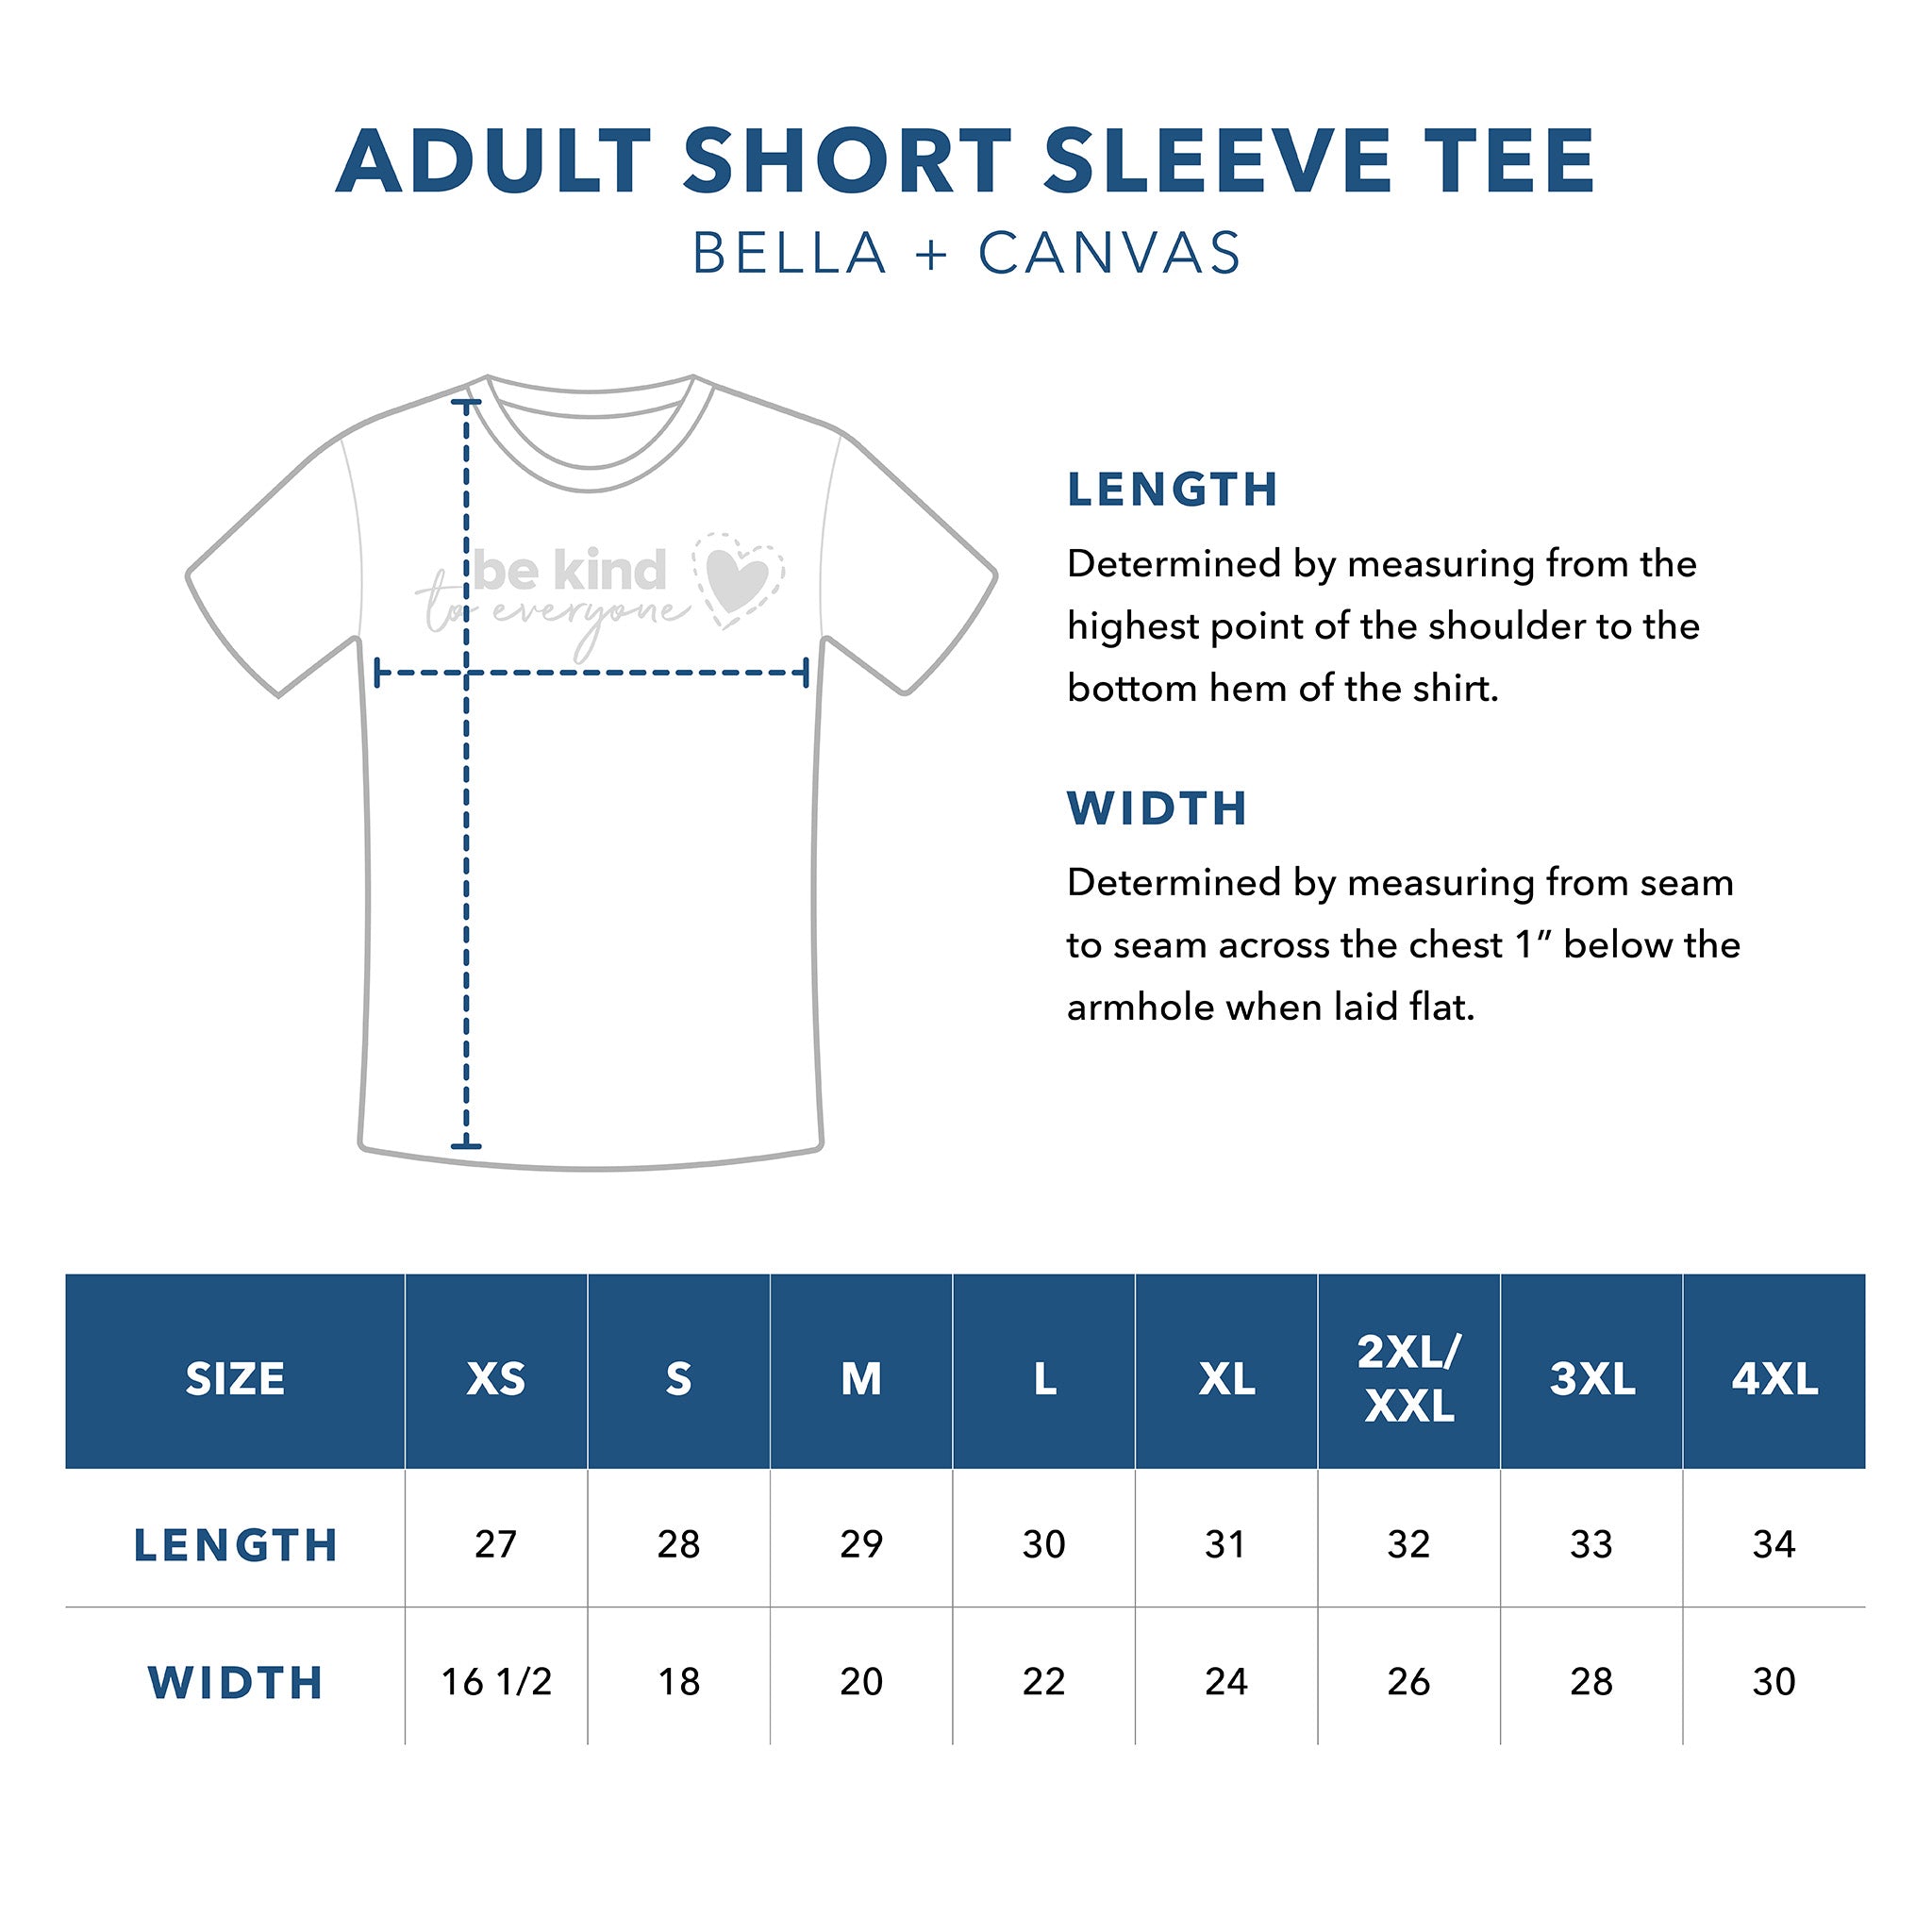 Adult Bella + Canvas Short Sleeve Tee Sizing Guide